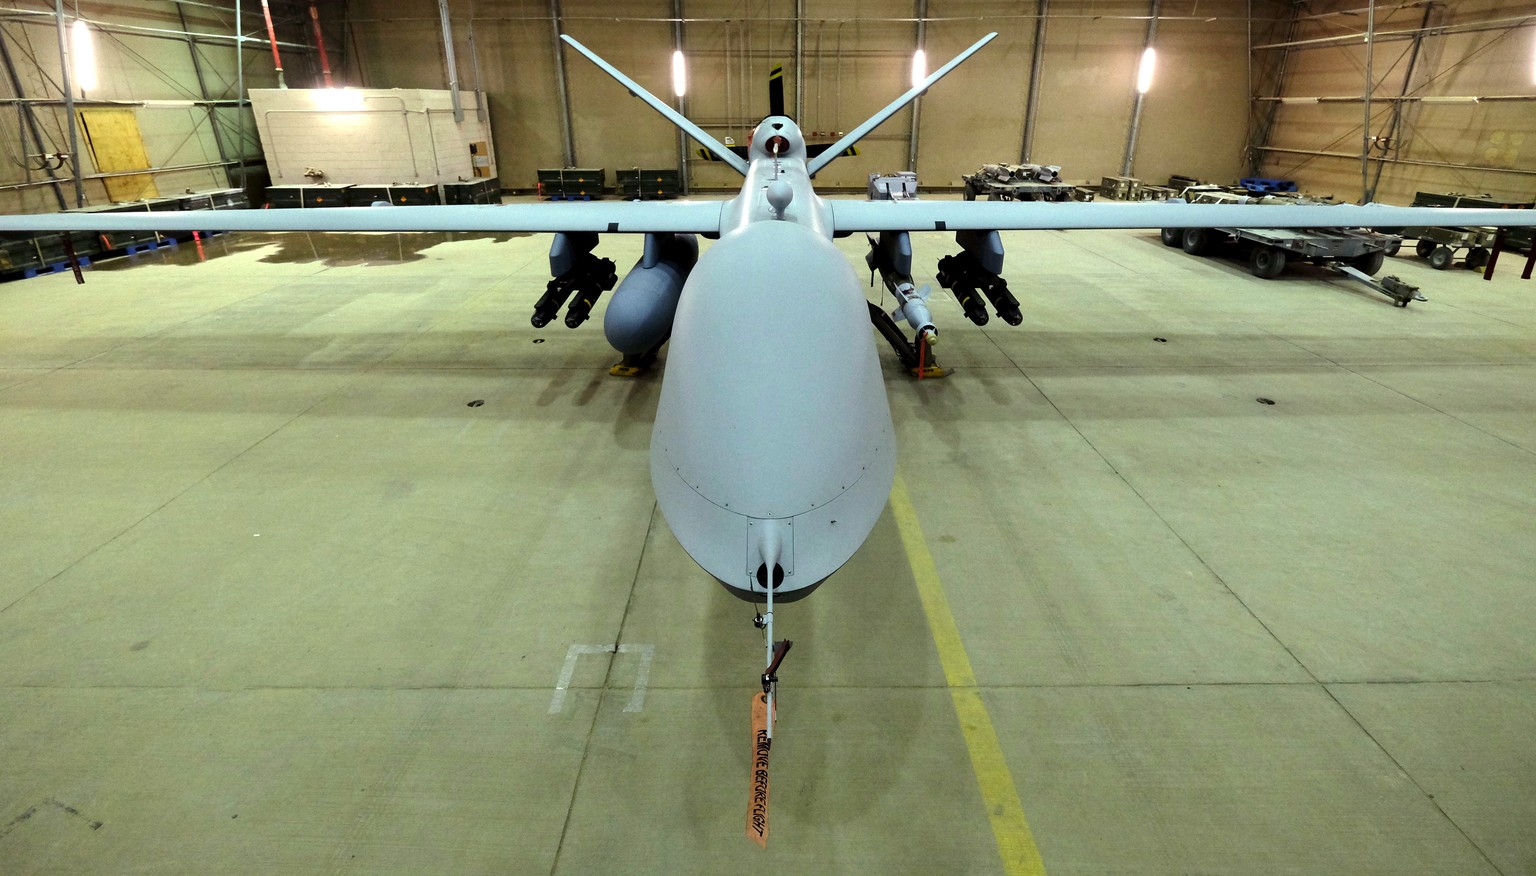 A U.S. Air Force MQ-9 Reaper drone sits armed with Hellfire missiles and a 500-pound bomb in a hanger at Kandahar Airfield, Afghanistan March 9, 2016. REUTERS/Josh Smith/File Photo